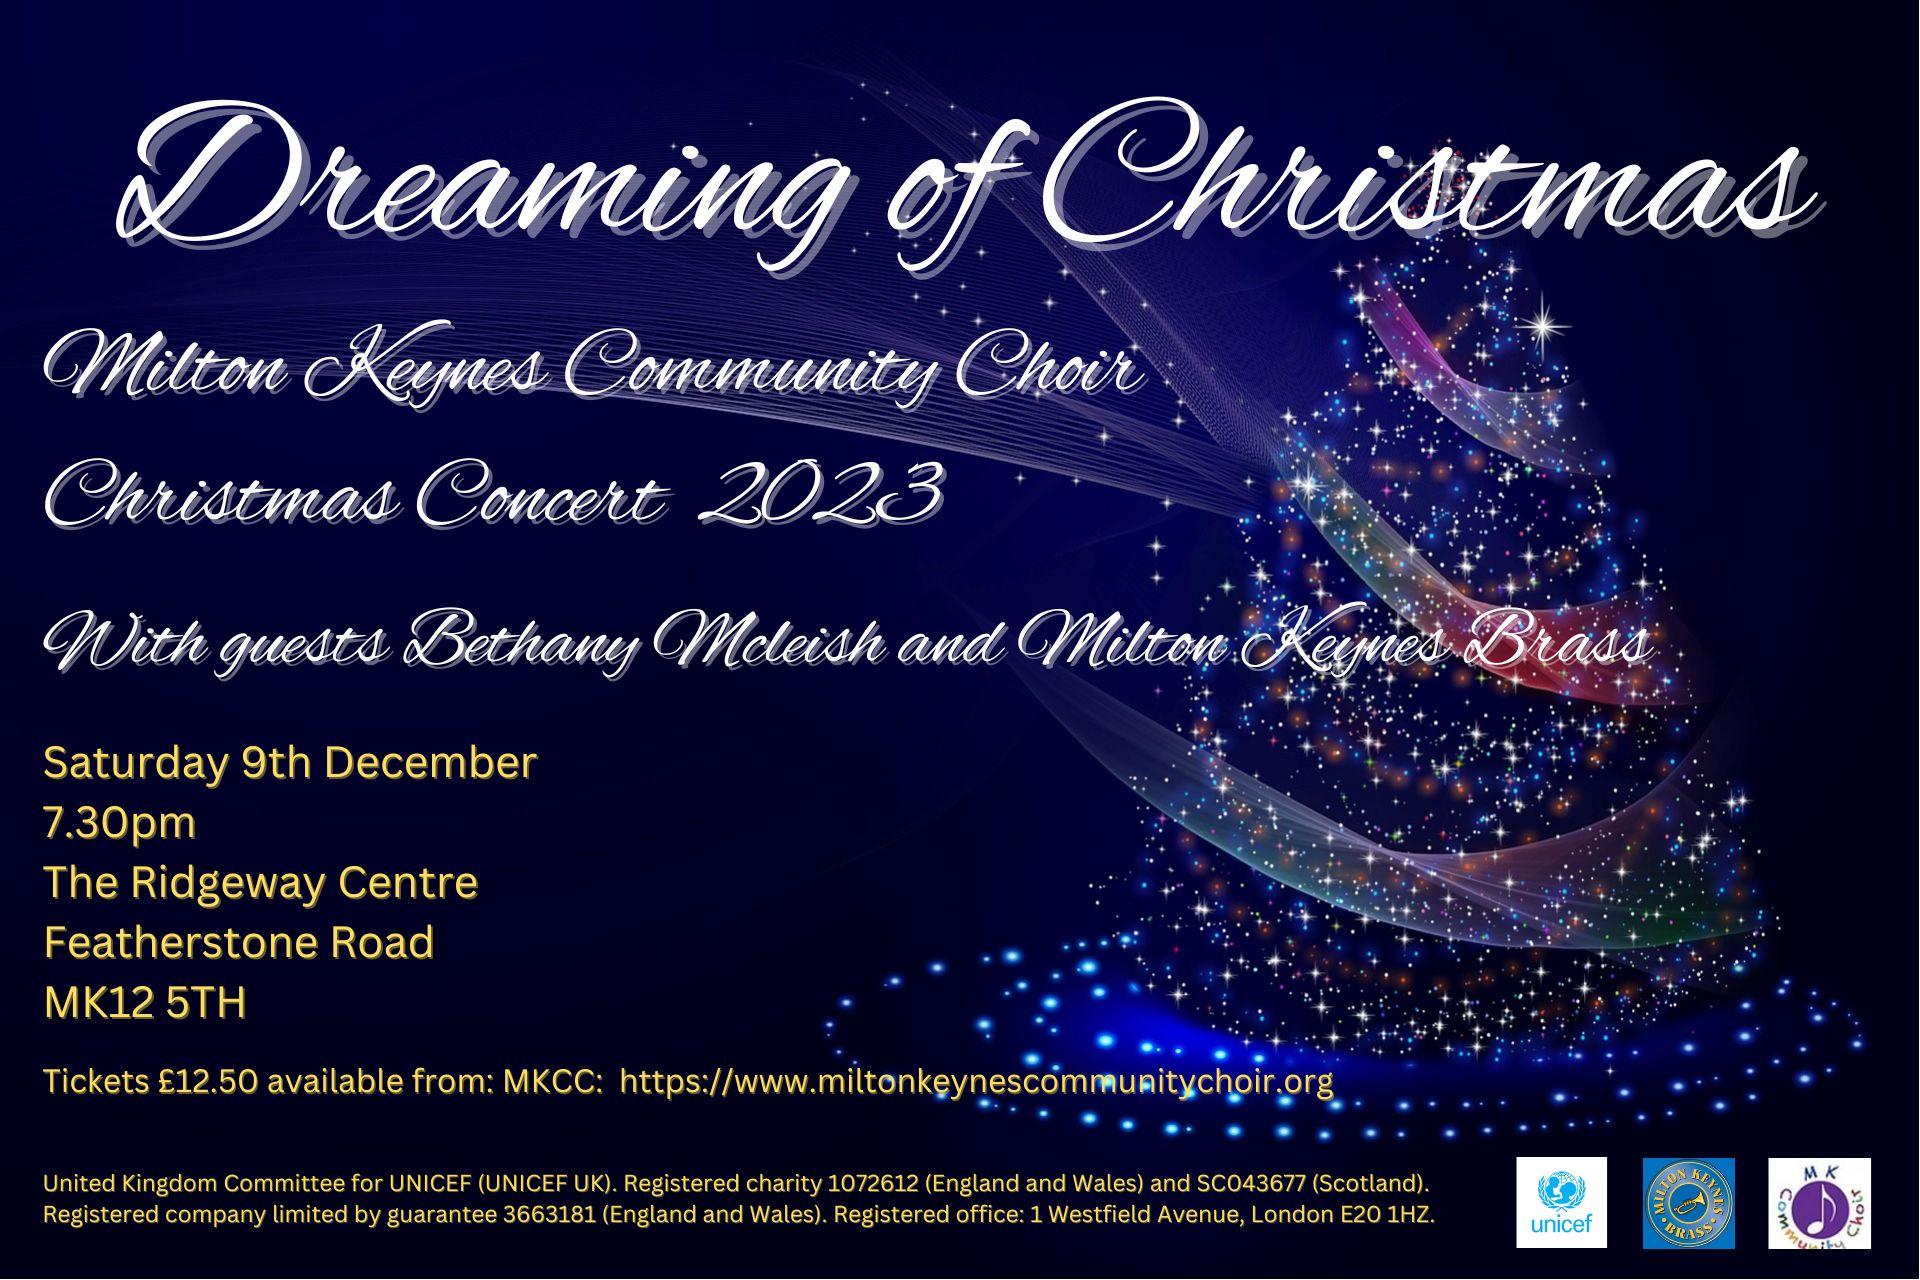 'Dreaming of Christmas' concert